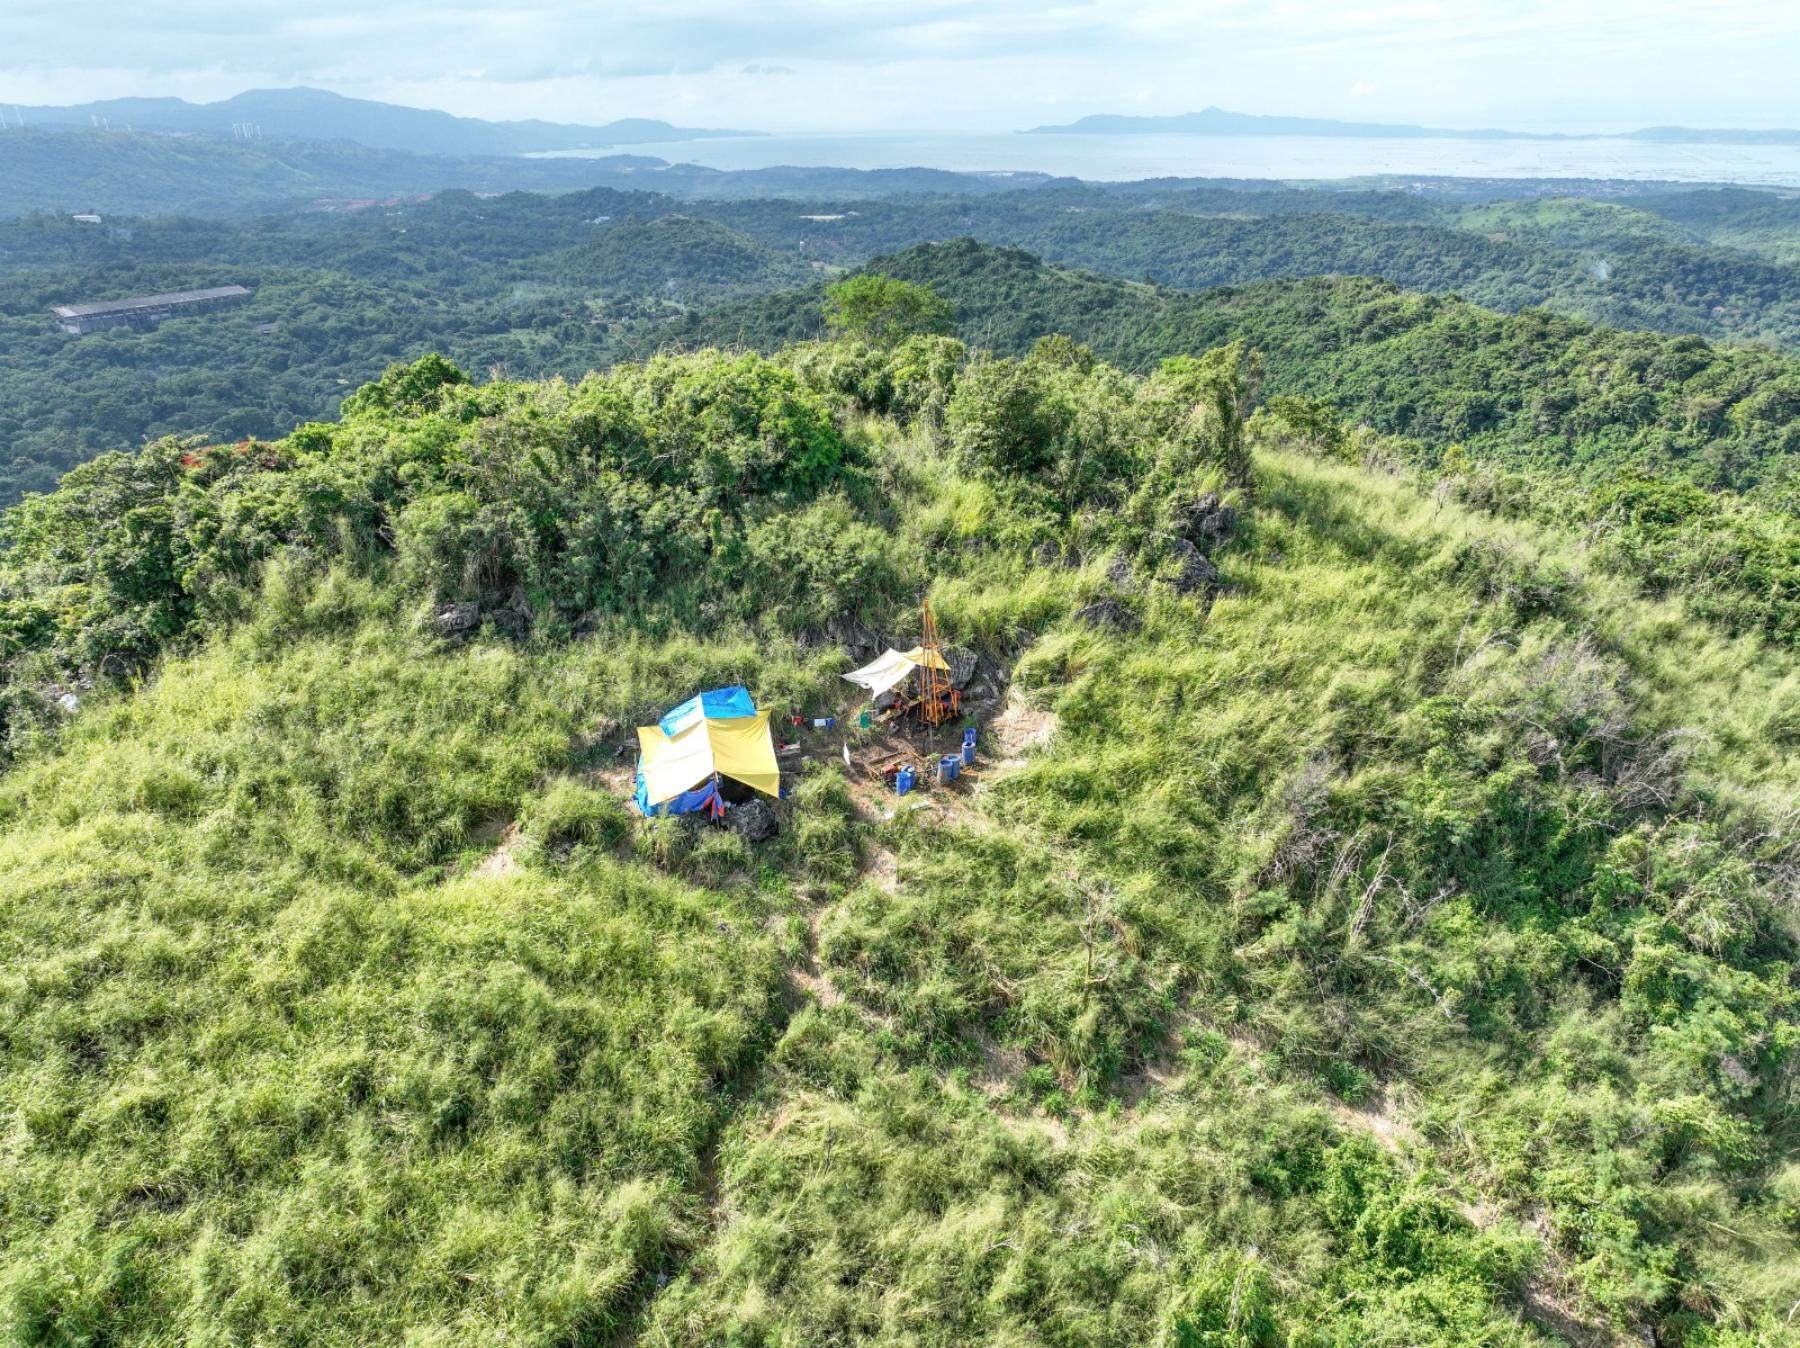 Drone footage taken by the Masungi Georeserve Foundation Inc shows evidence of drilling operations within the conservation area. Photo: Masungi Georeserve Foundation Inc